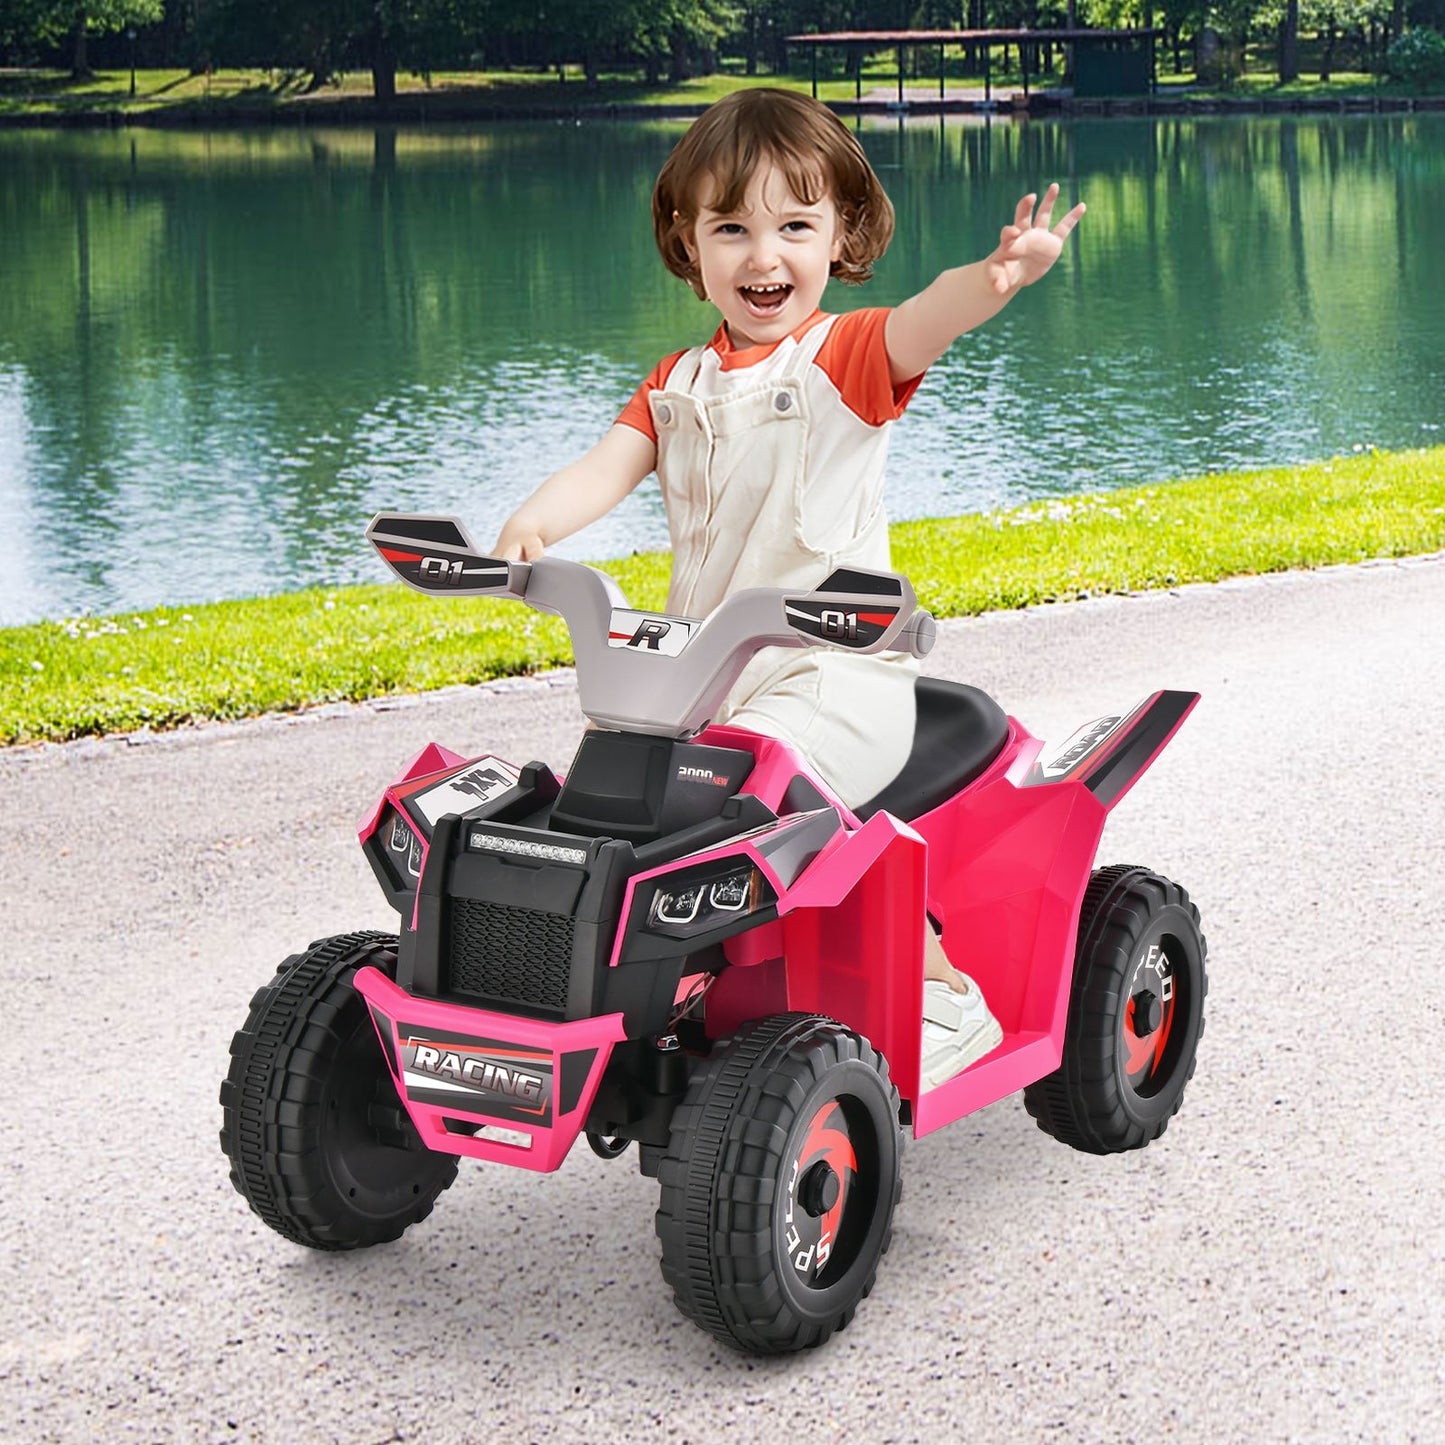 Kids Ride on ATV 4 Wheeler Quad Toy Car with Direction Control, Pink at Gallery Canada